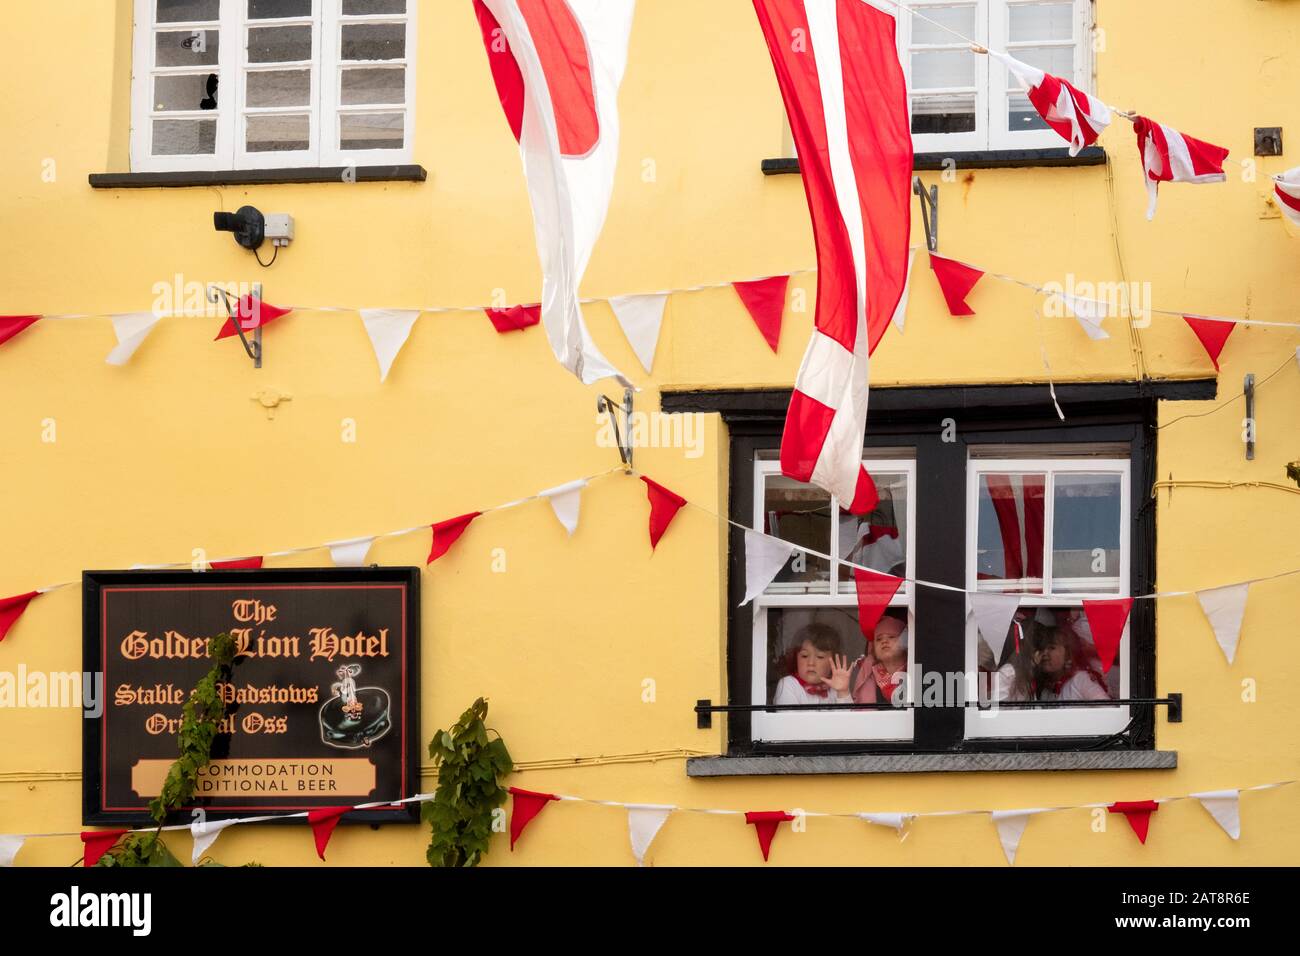 The Golden Lion Hotel, the starting point of the 'Old Oss' or red oss procession, Obby Oss procession, Padstow, Cornwall, UK Stock Photo